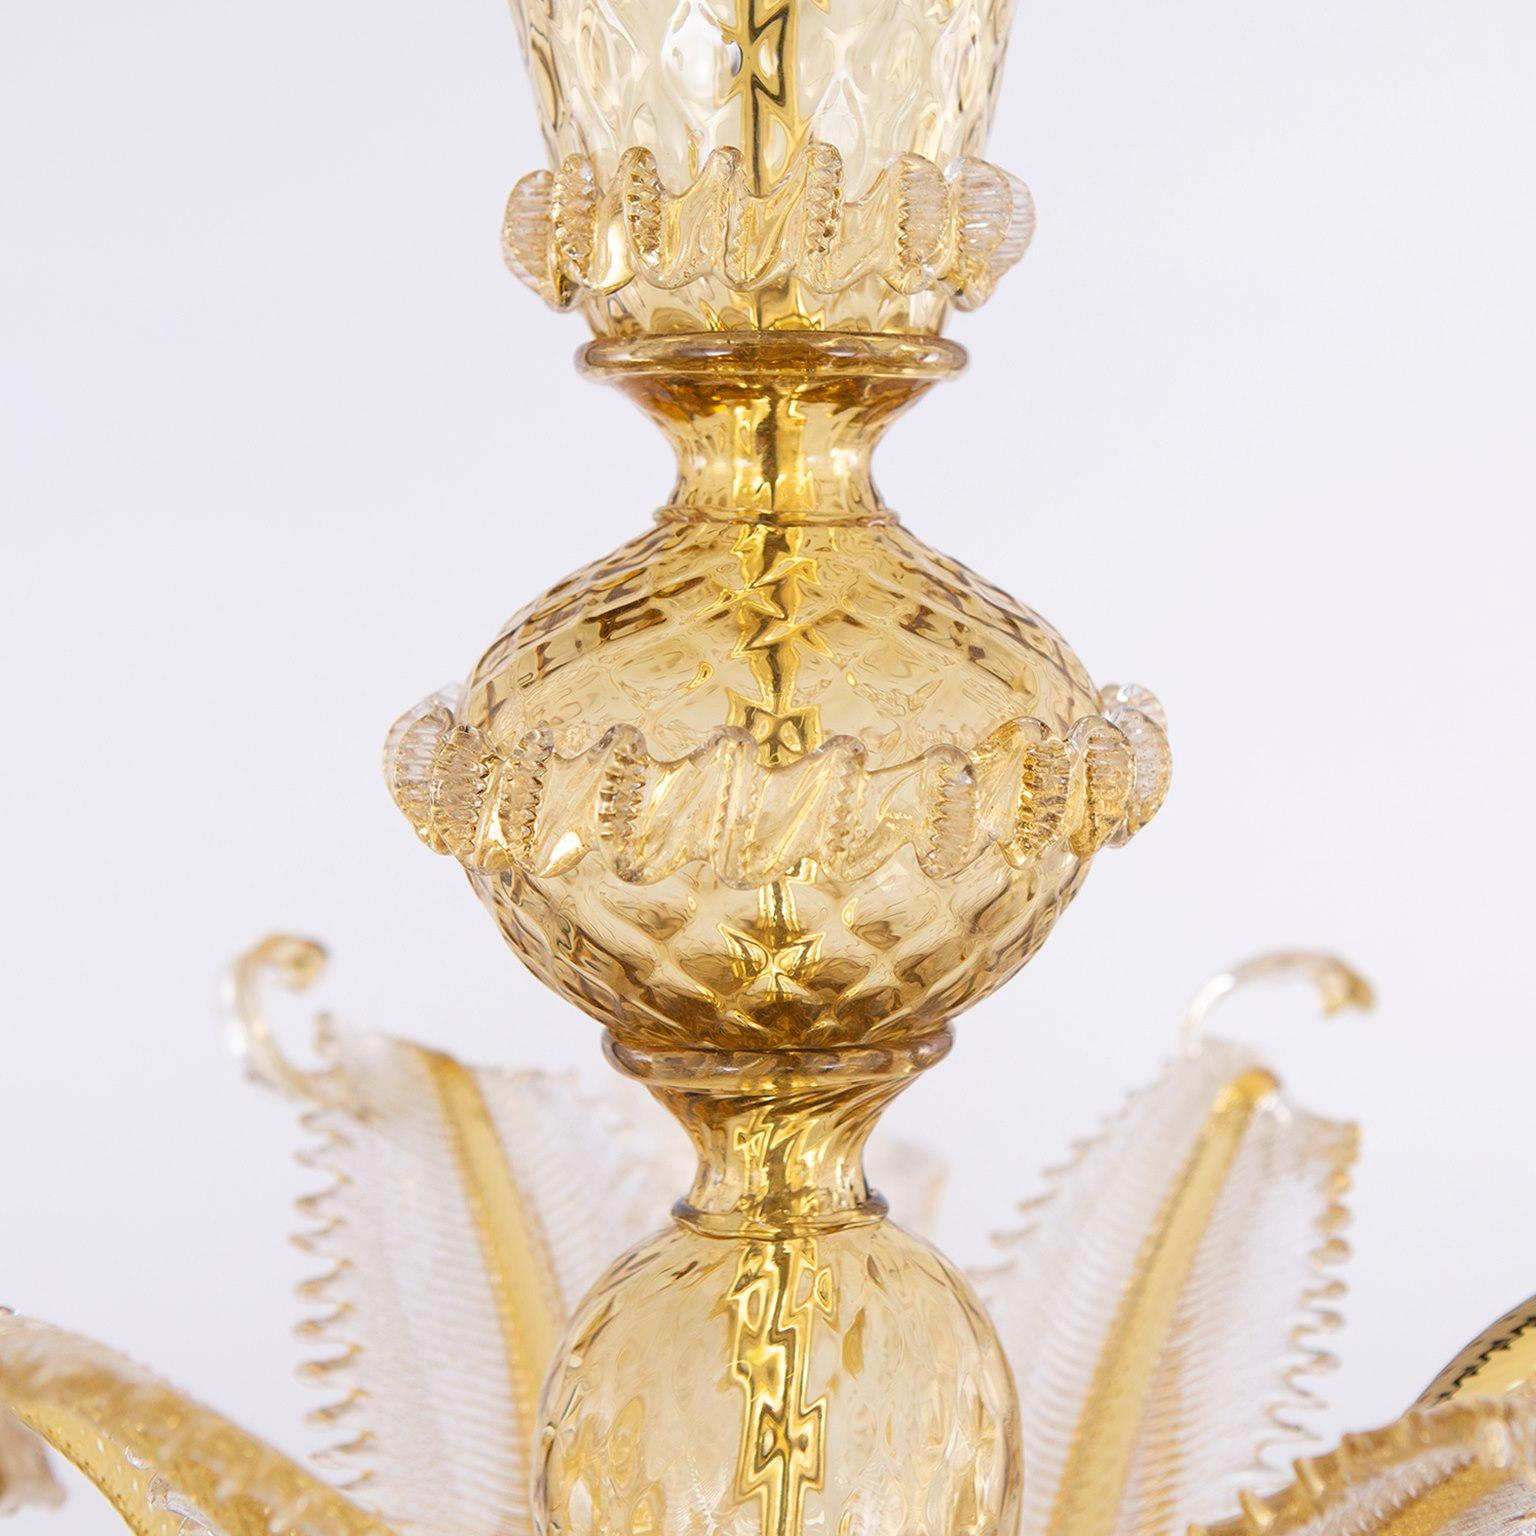 Classic chandelier 5 arms straw Murano glass details clear and gold by Multiforme.
The classic Murano glass chandelier, as it is in the collective imagination. As many other chandeliers in our collections, V-Classic 800 is designed with attention to